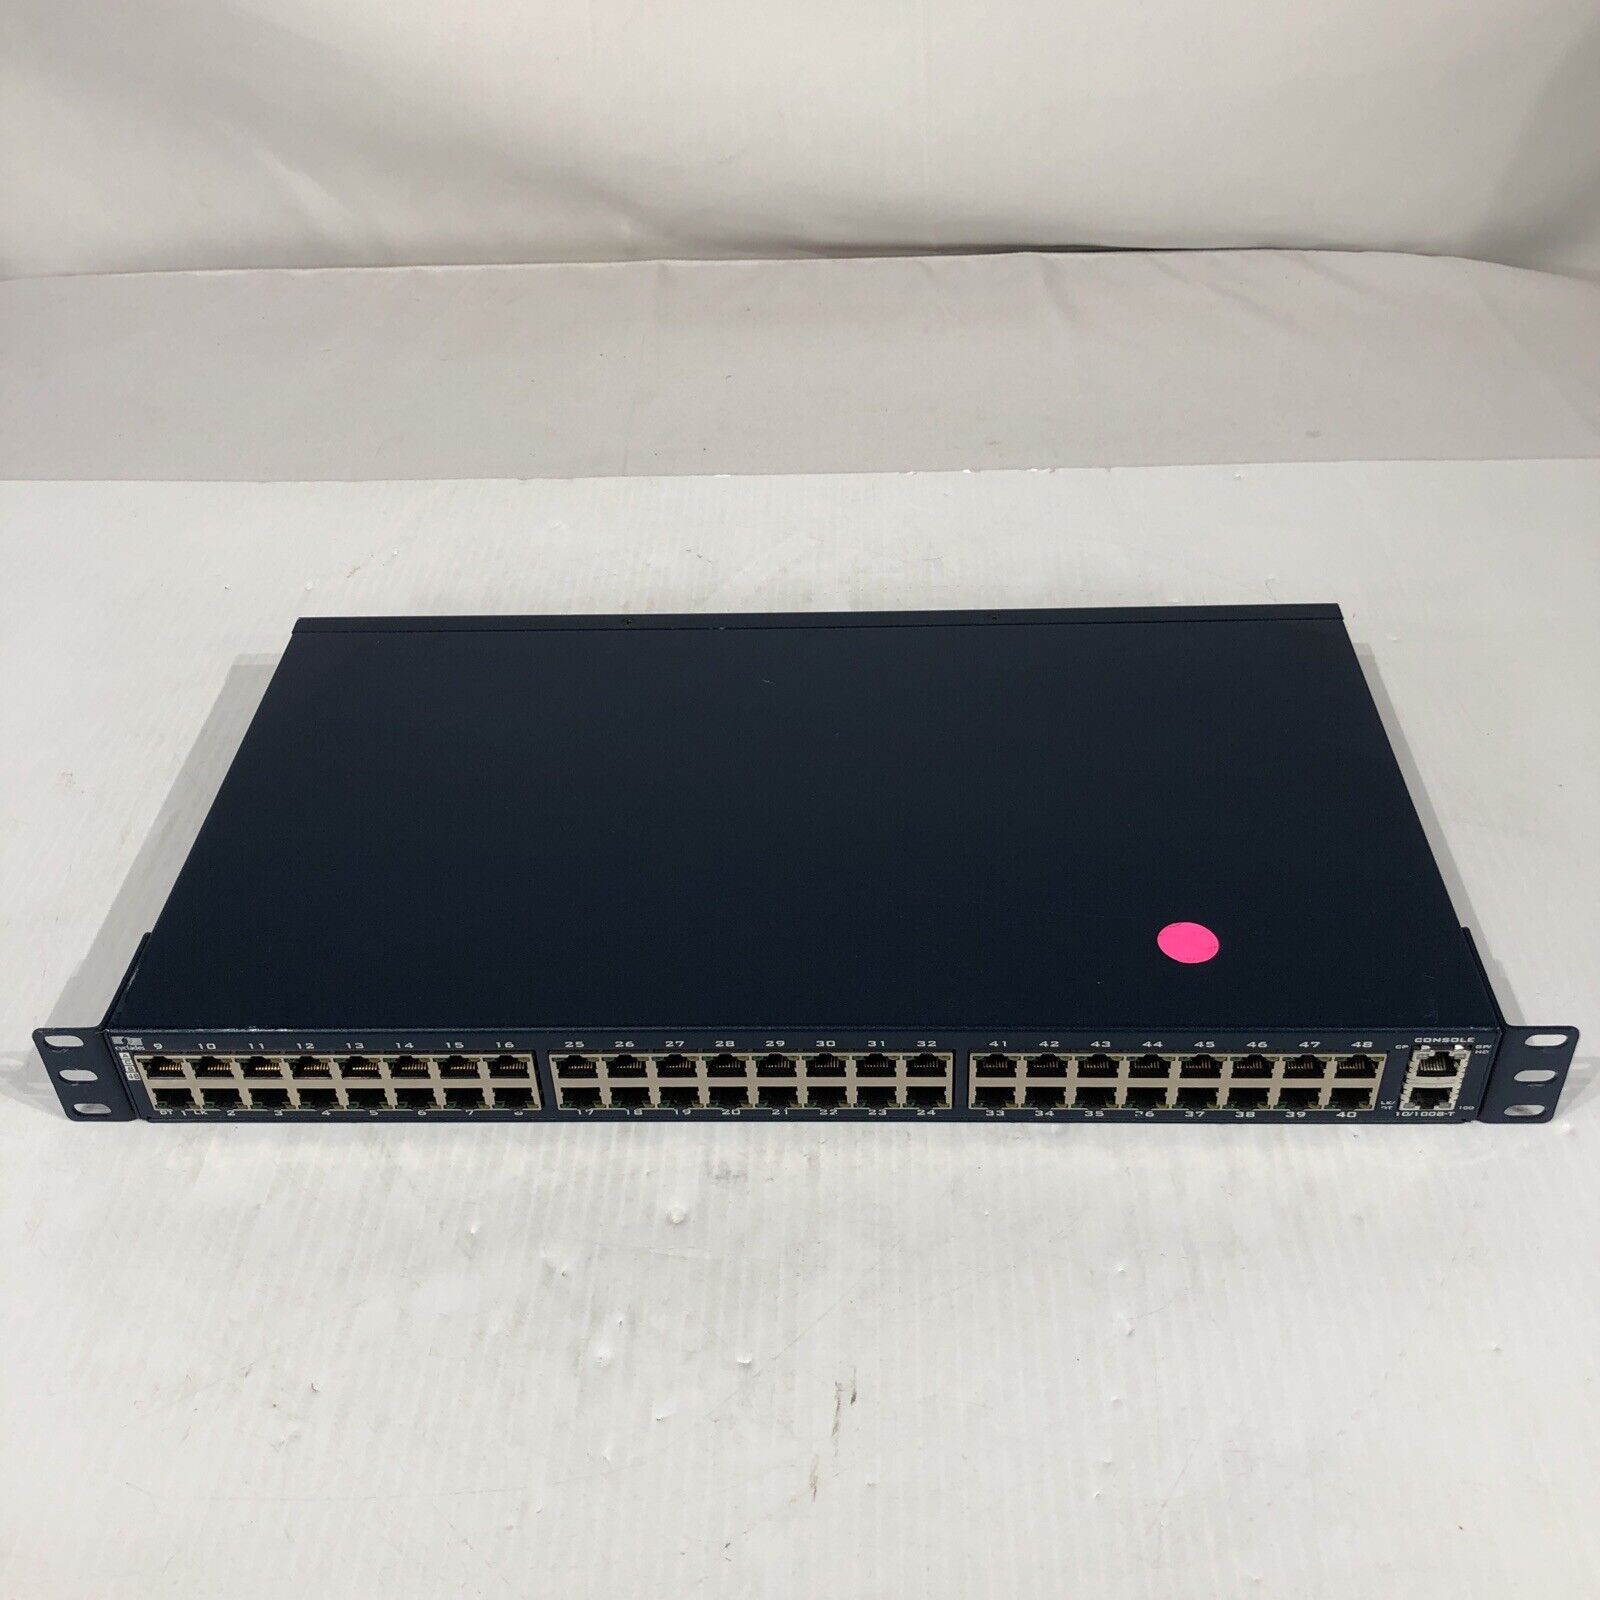 CYCLADES ACS48 48 PORT SAC CONSOLE SERVER AVOCENT ATP0190 520-500-503- FOR PARTS